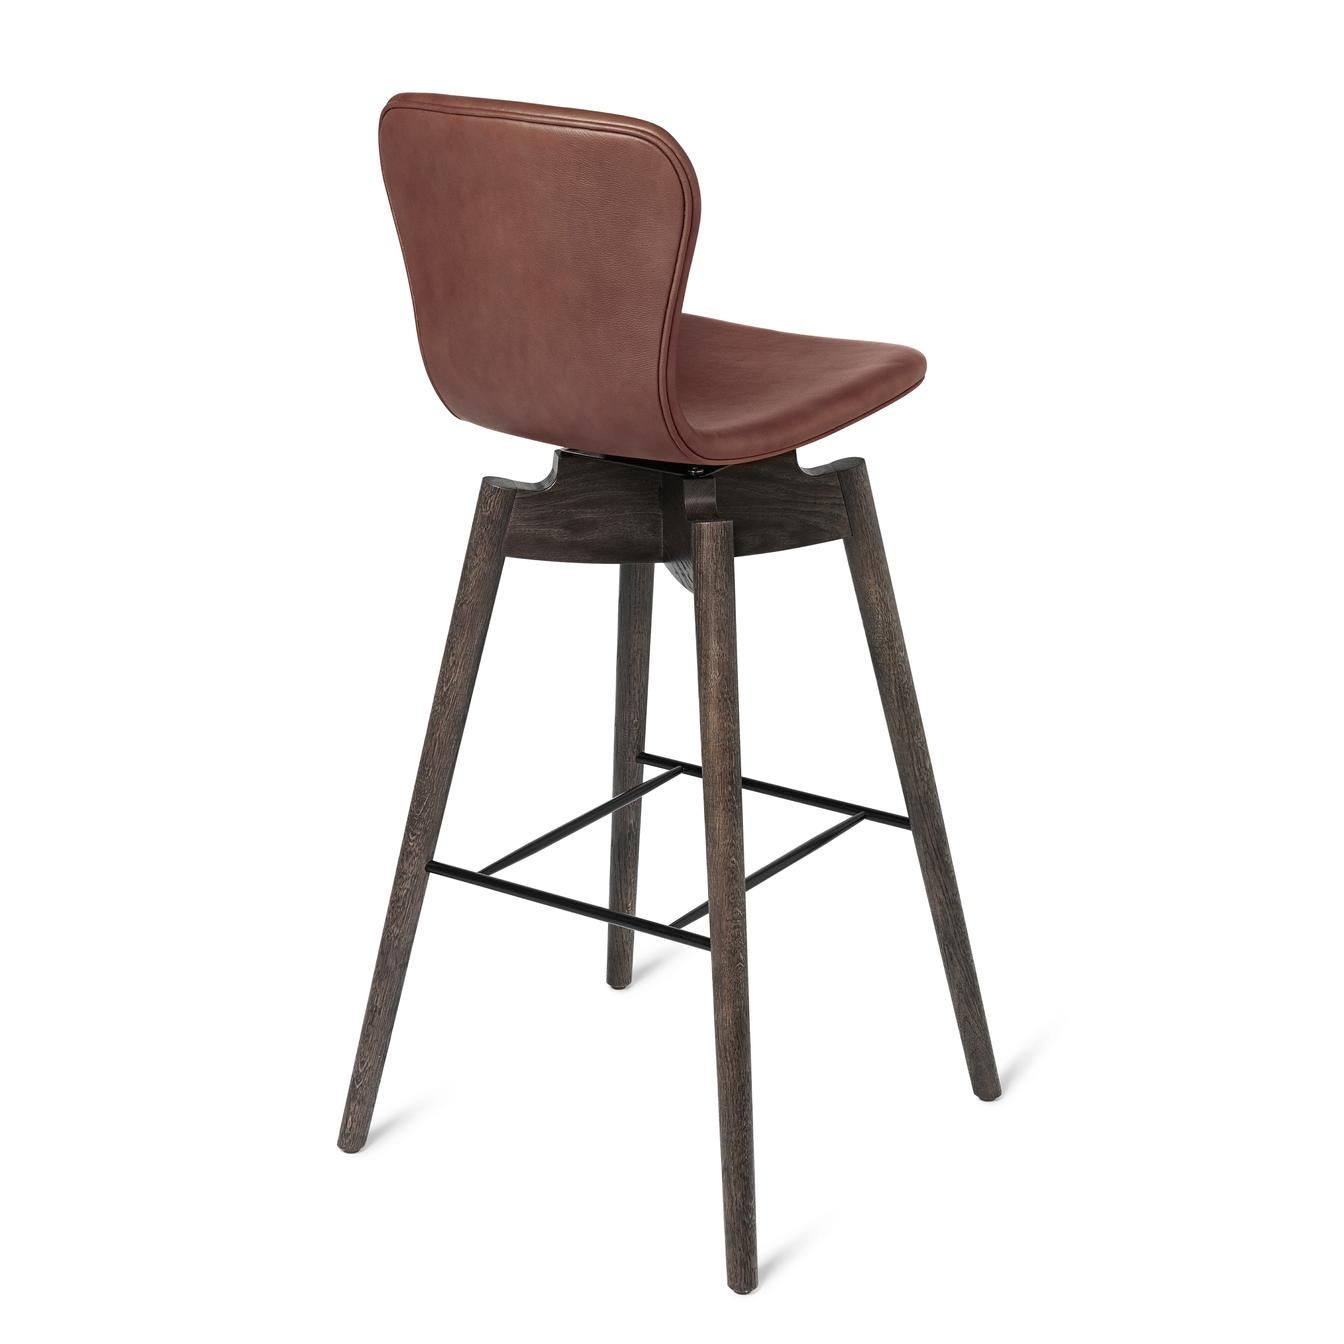 The silhuette of the shell bar stool is elegant and features long lines in solid oak wood and a soft leather backrest swivel-seat in rich and genuine tones and with clean hand tailored stitches.
Together with the most recognised leather supplier in